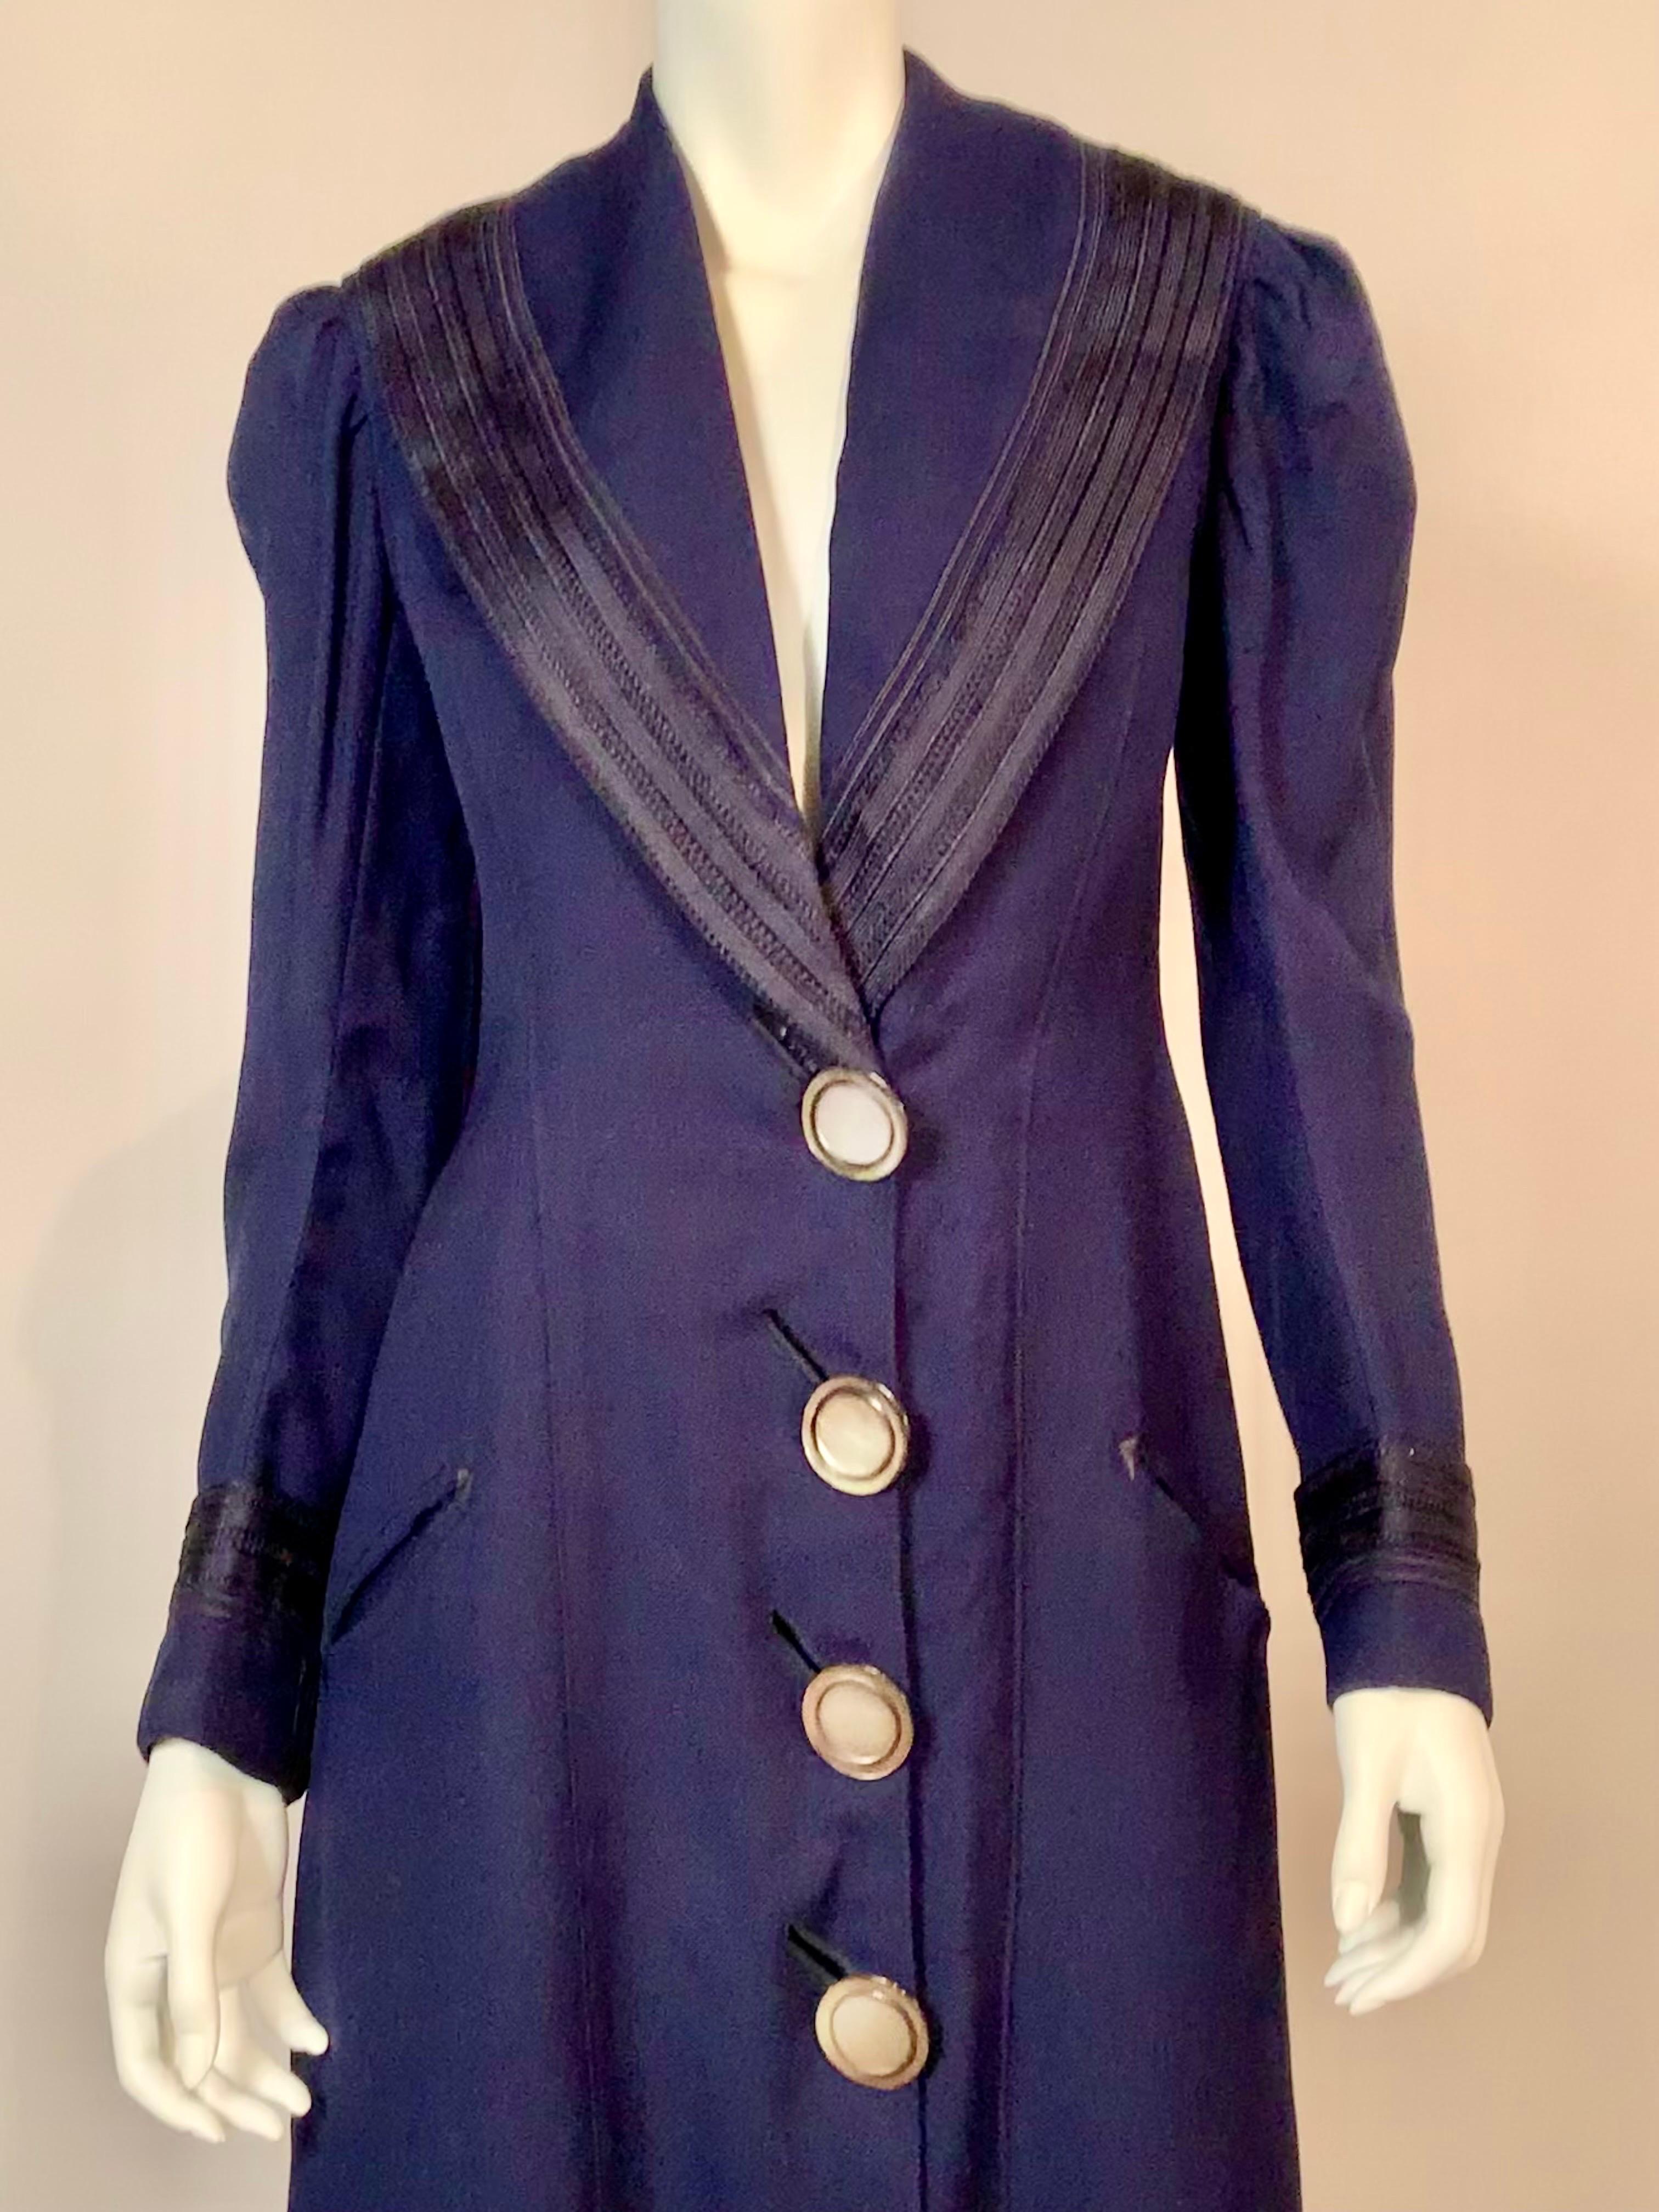 Unlabeled and unlined this chic Edwardian navy blue wool coat has navy blue braid trim on the collar and cuffs.  The slanted pockets have embroidered corners and the four large Mother of Pearl buttons have diagonal button holes.  There are deep